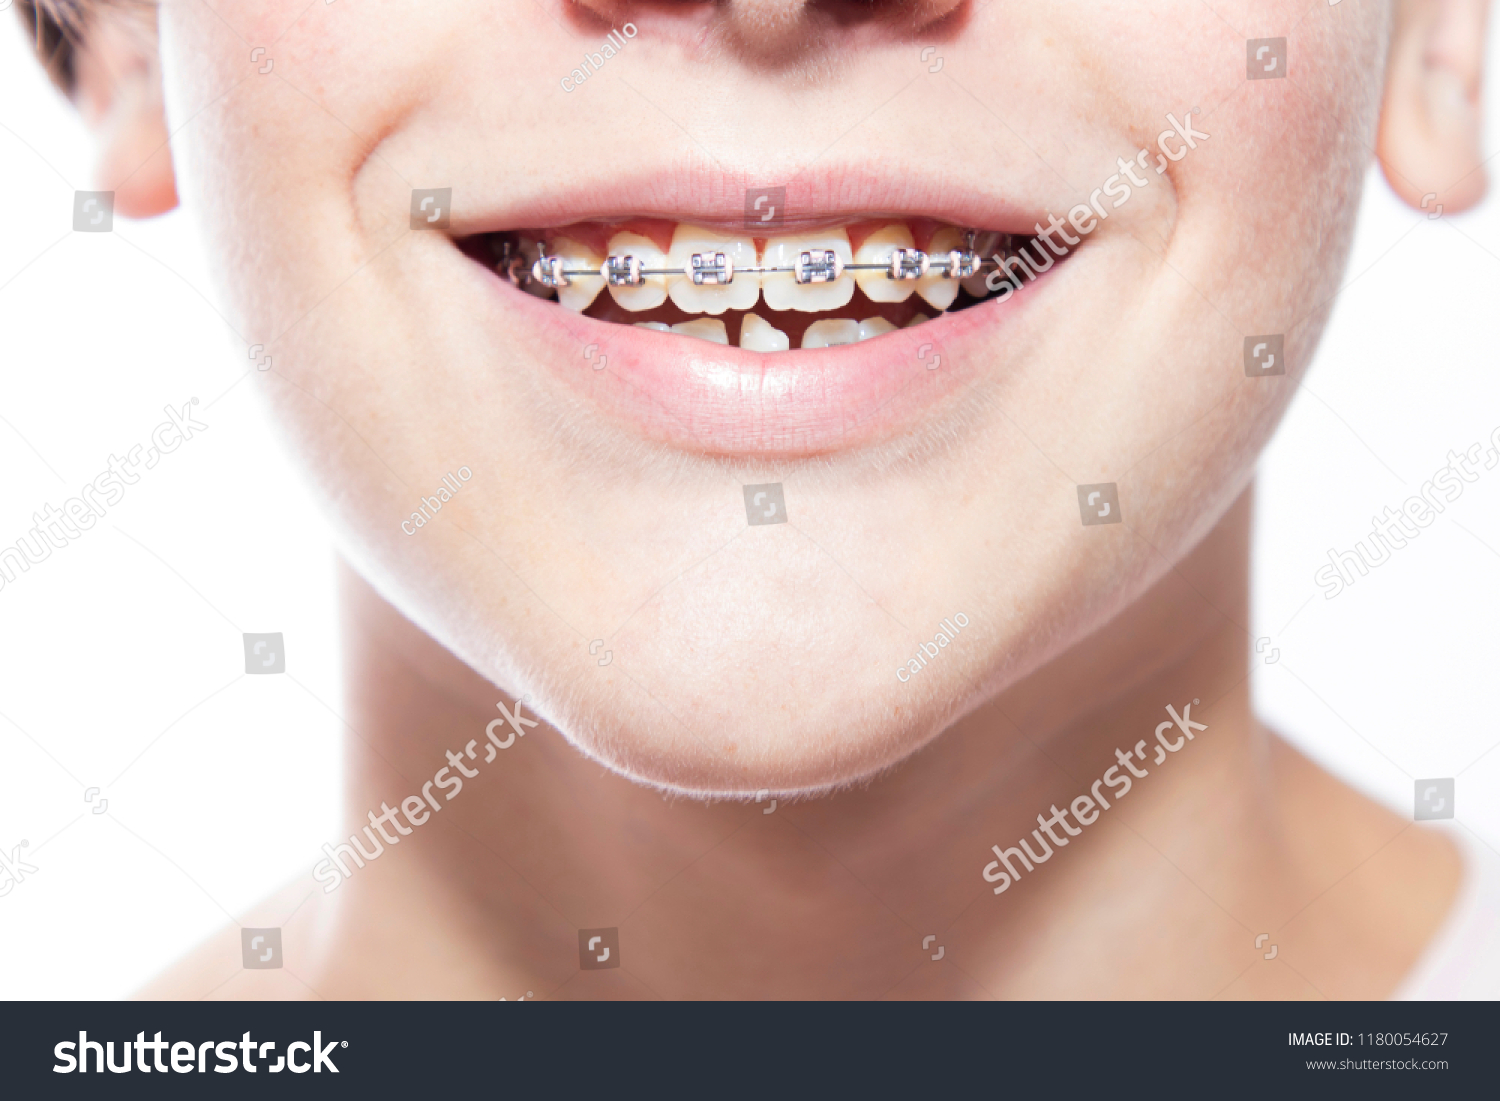 close-up of mouth with dental corrector or braces #1180054627